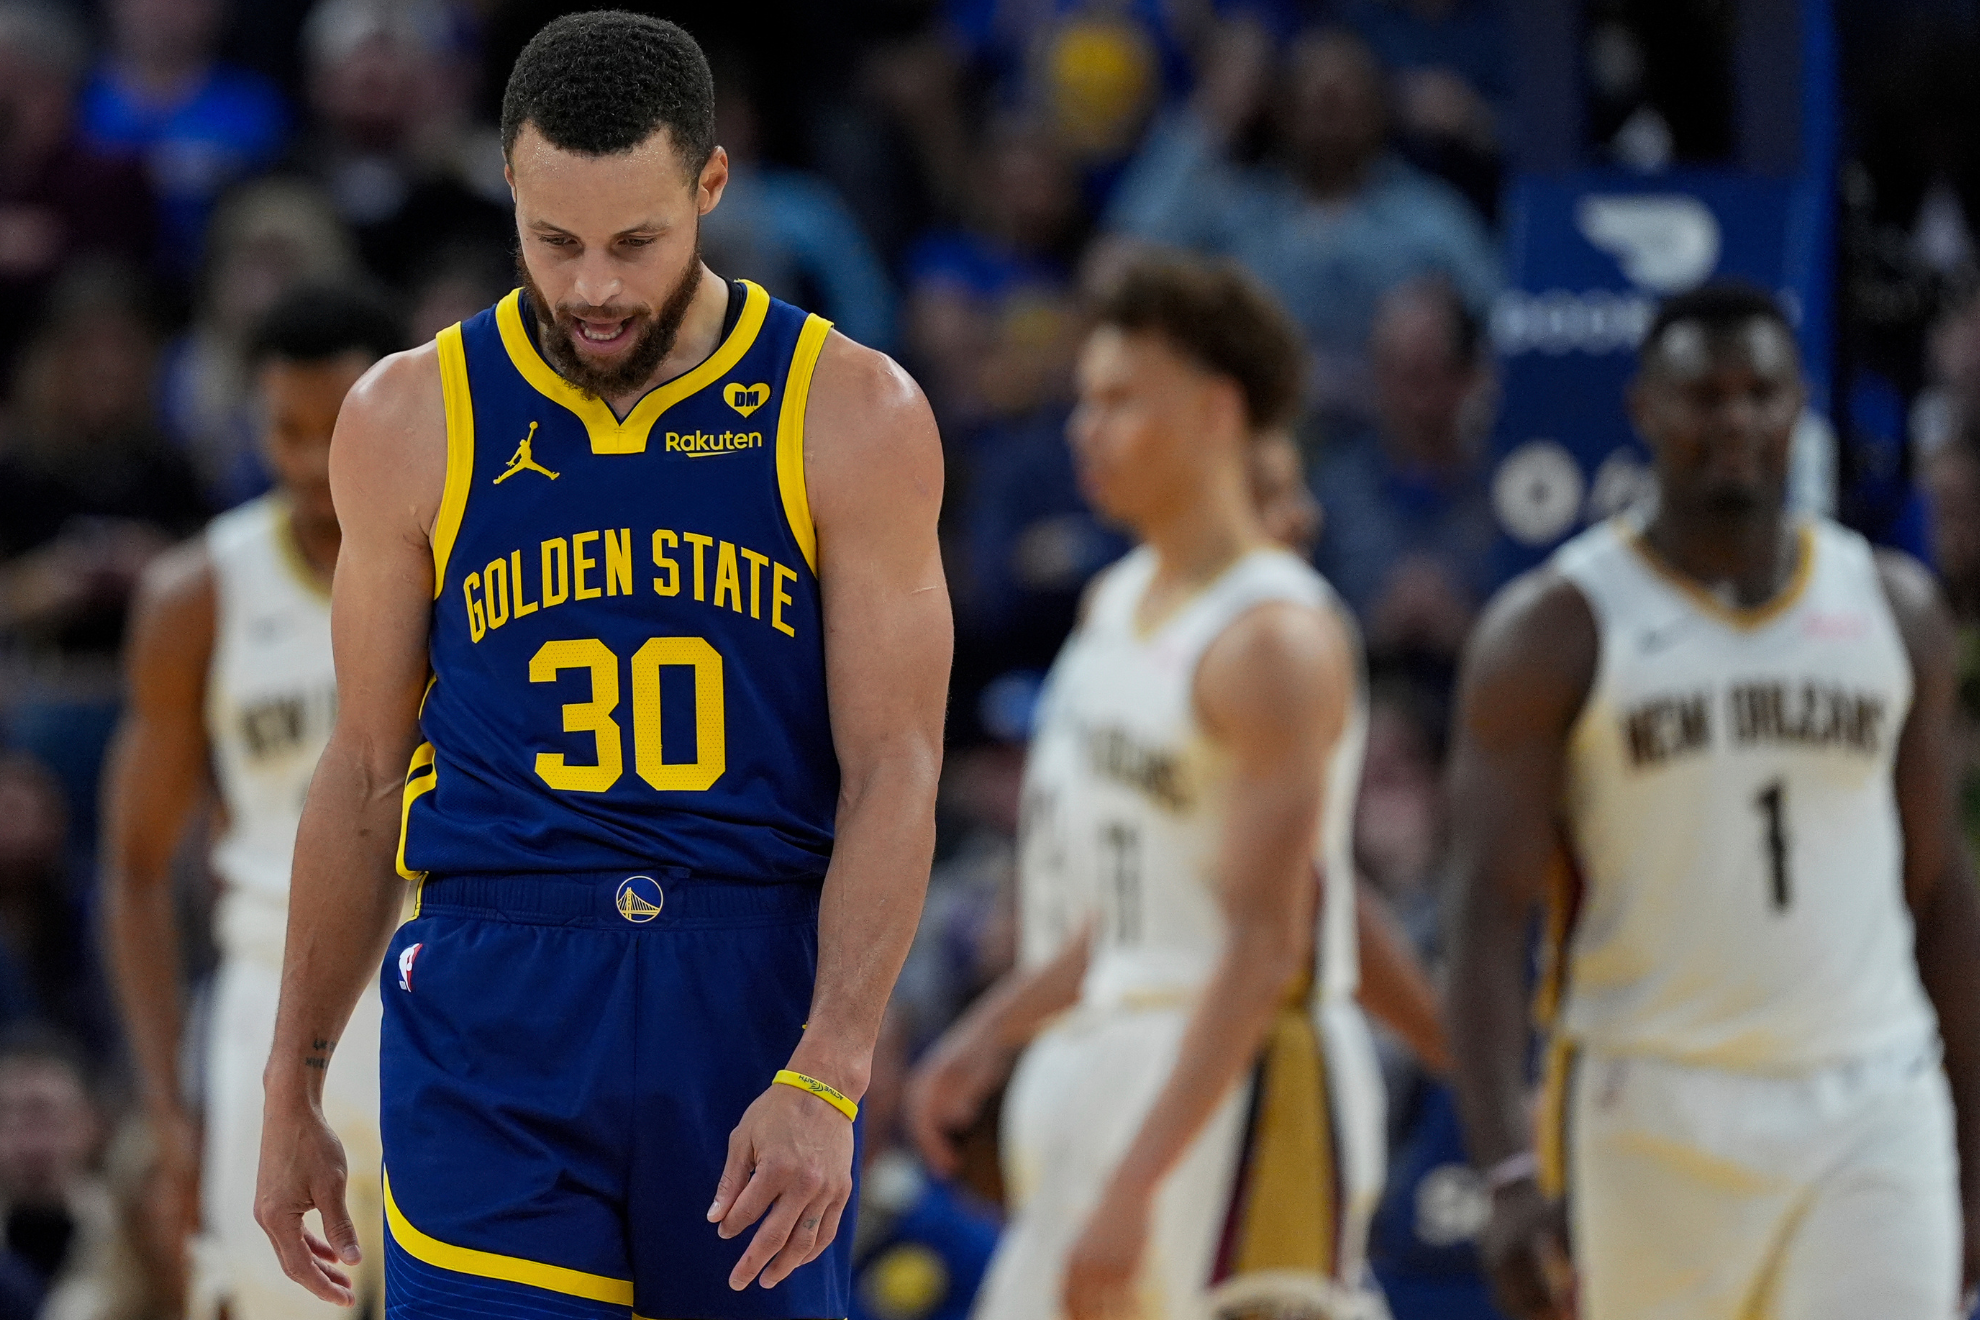 Stephen Curry is mad at Klay Thompson for stealing one of his titles on the final game of the season